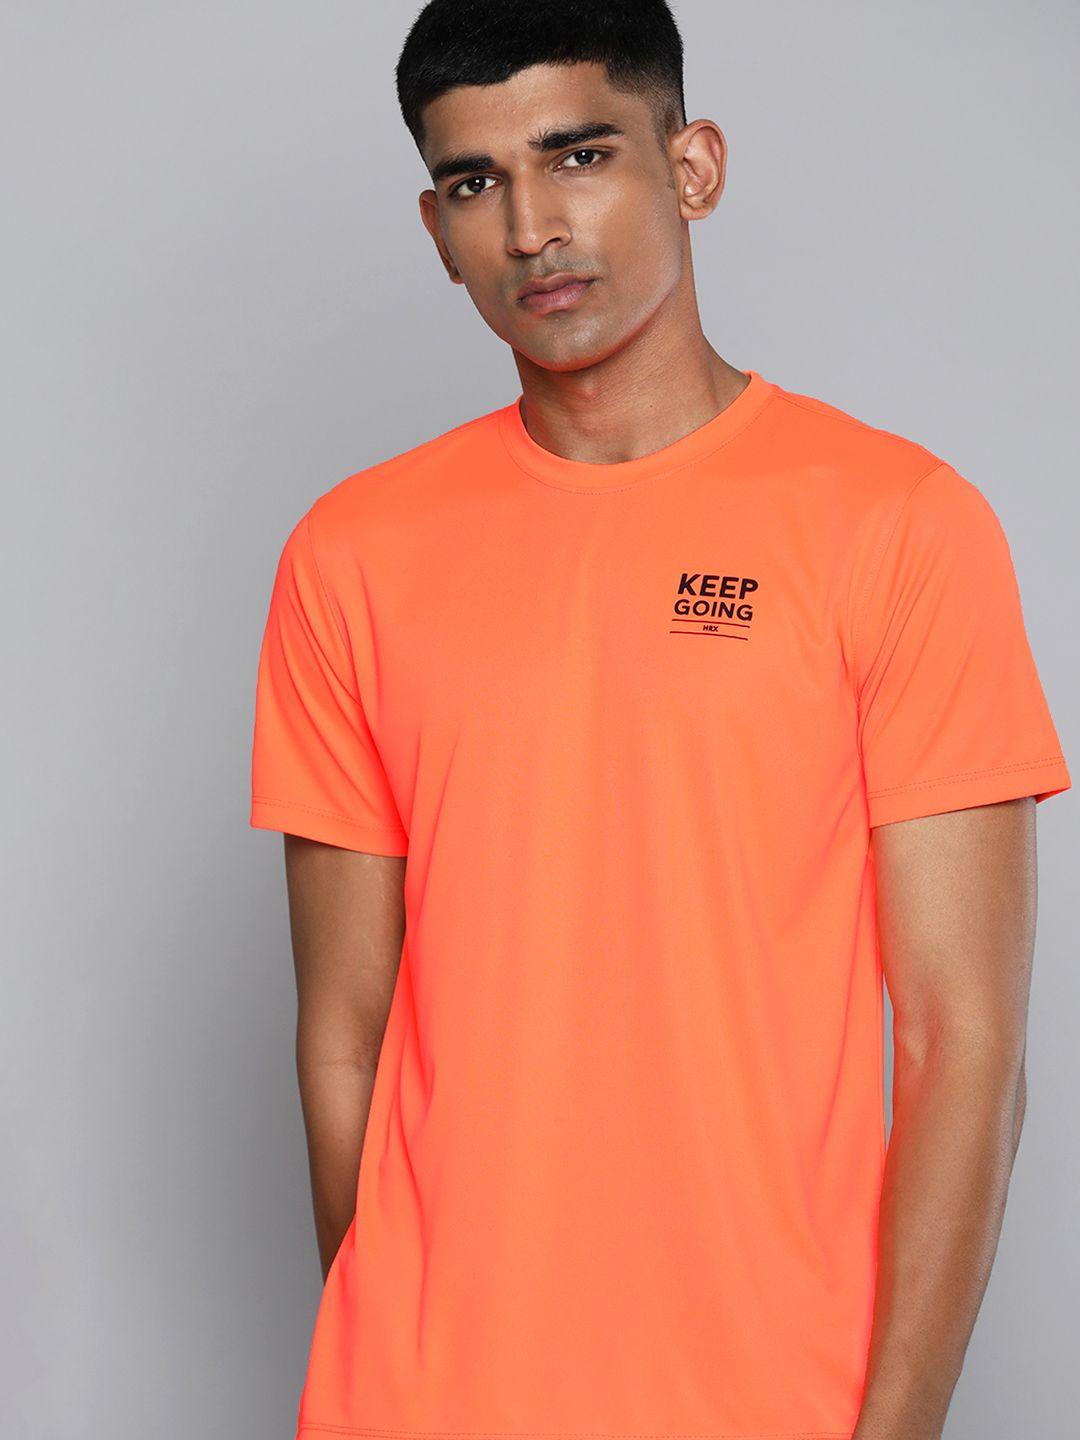 hrx-by-hrithik-roshan-rapid-dry-training-t-shirt-with-reflective-print-detail